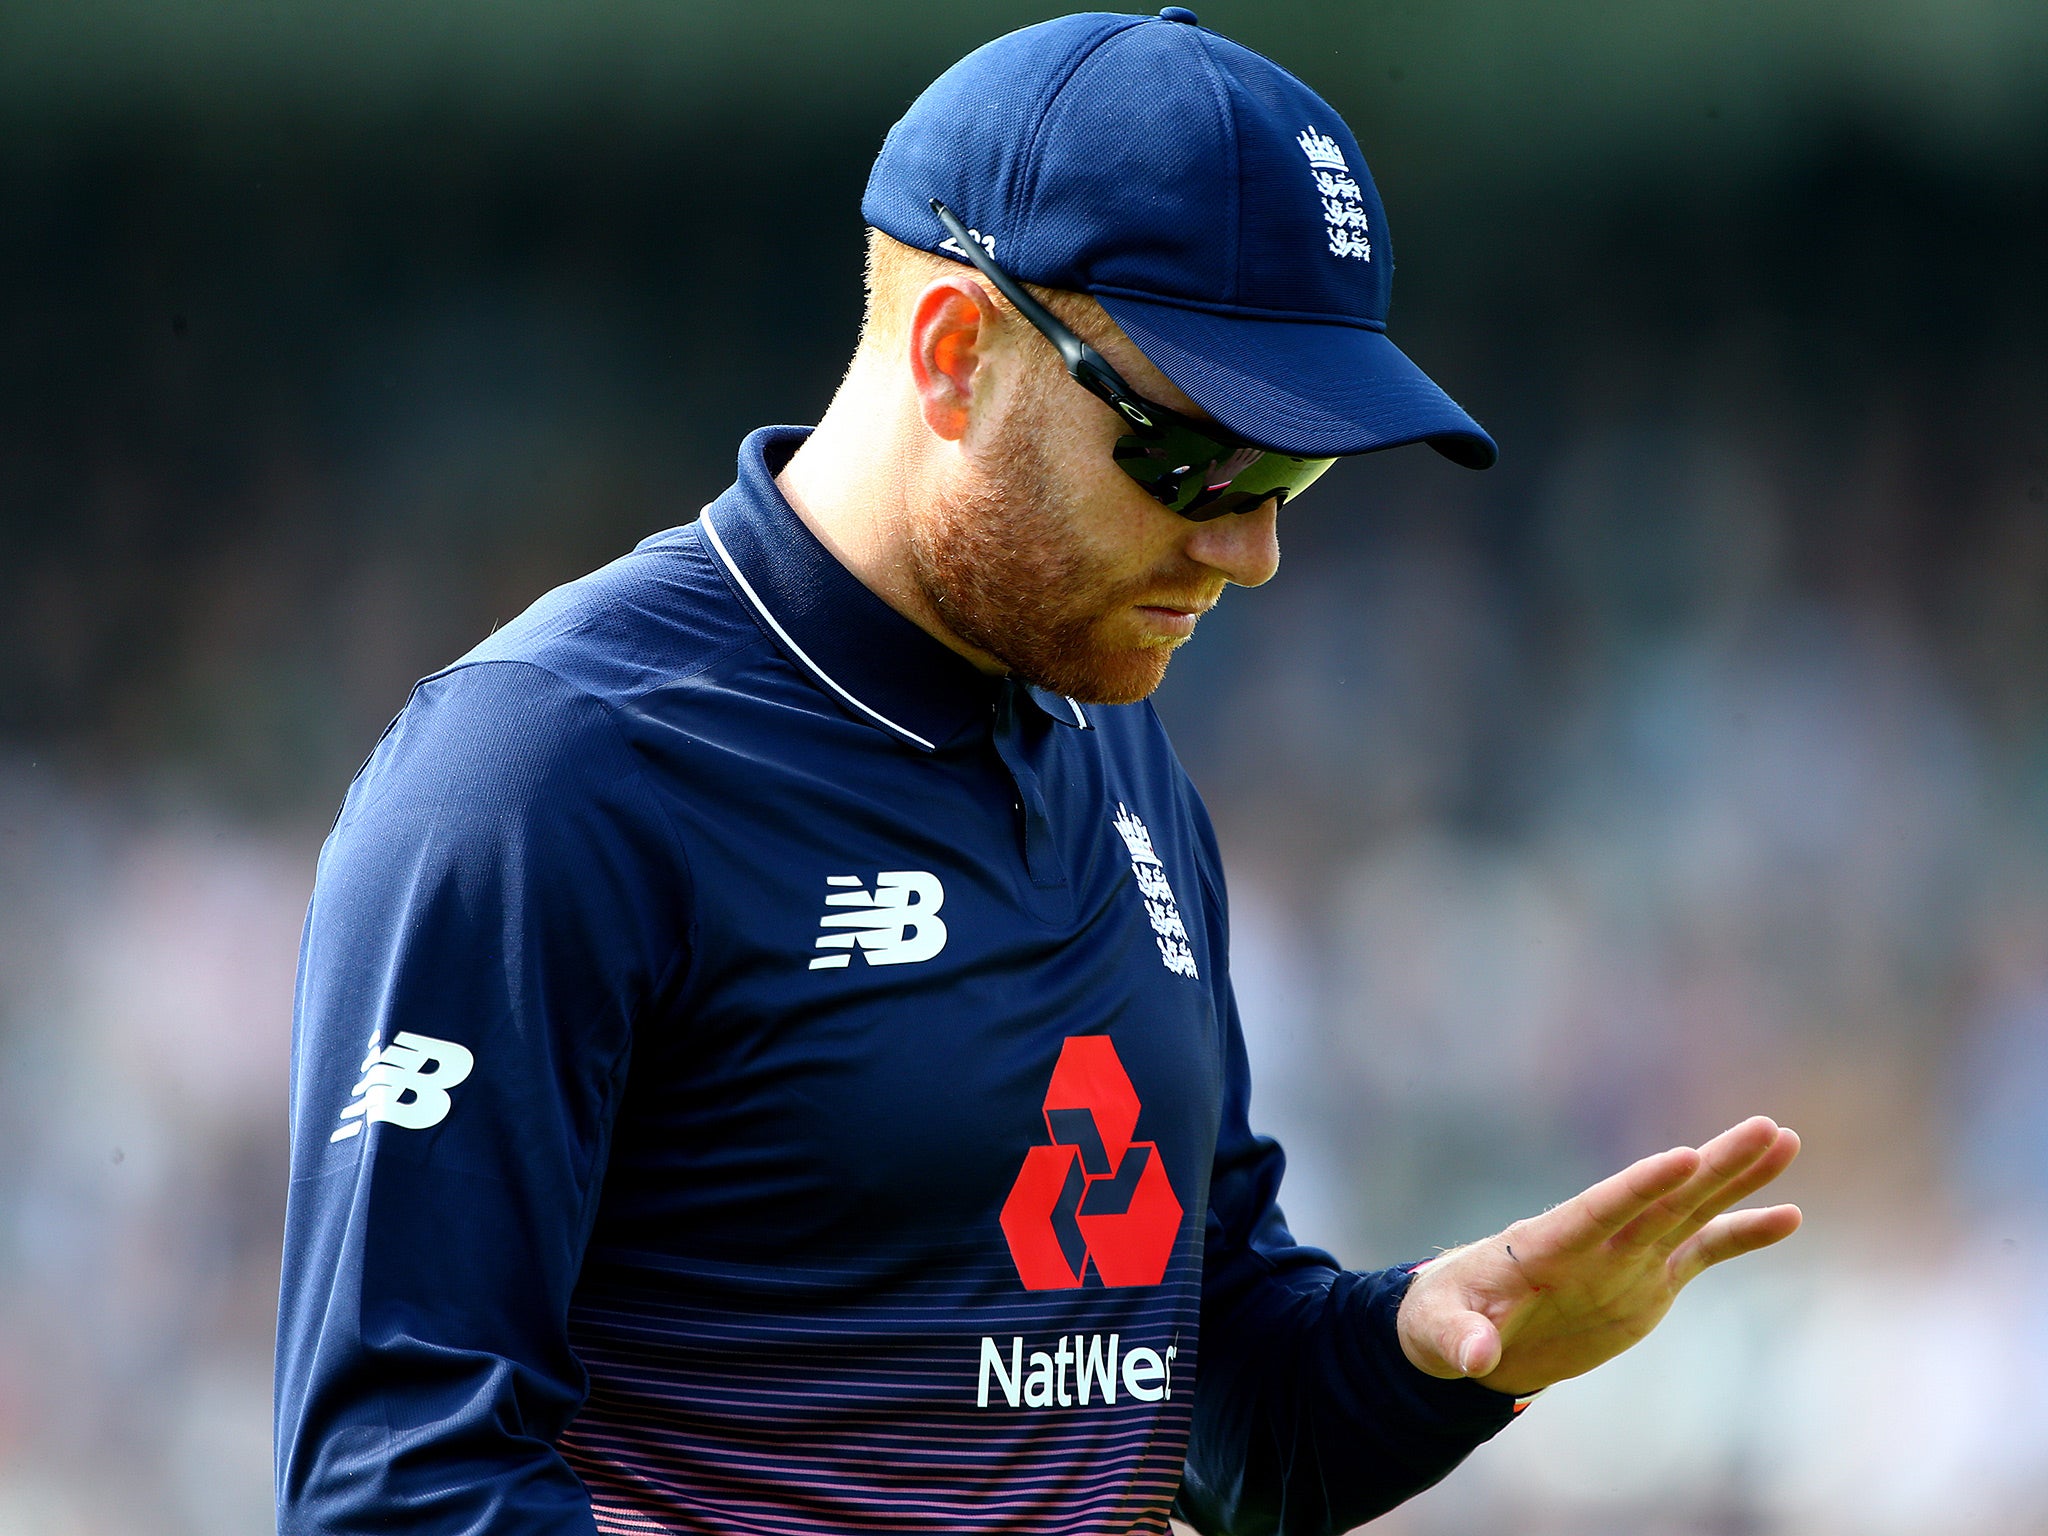 Jonny Bairstow's cameo against Ireland did little to help his selection chances according to Eoin Morgan